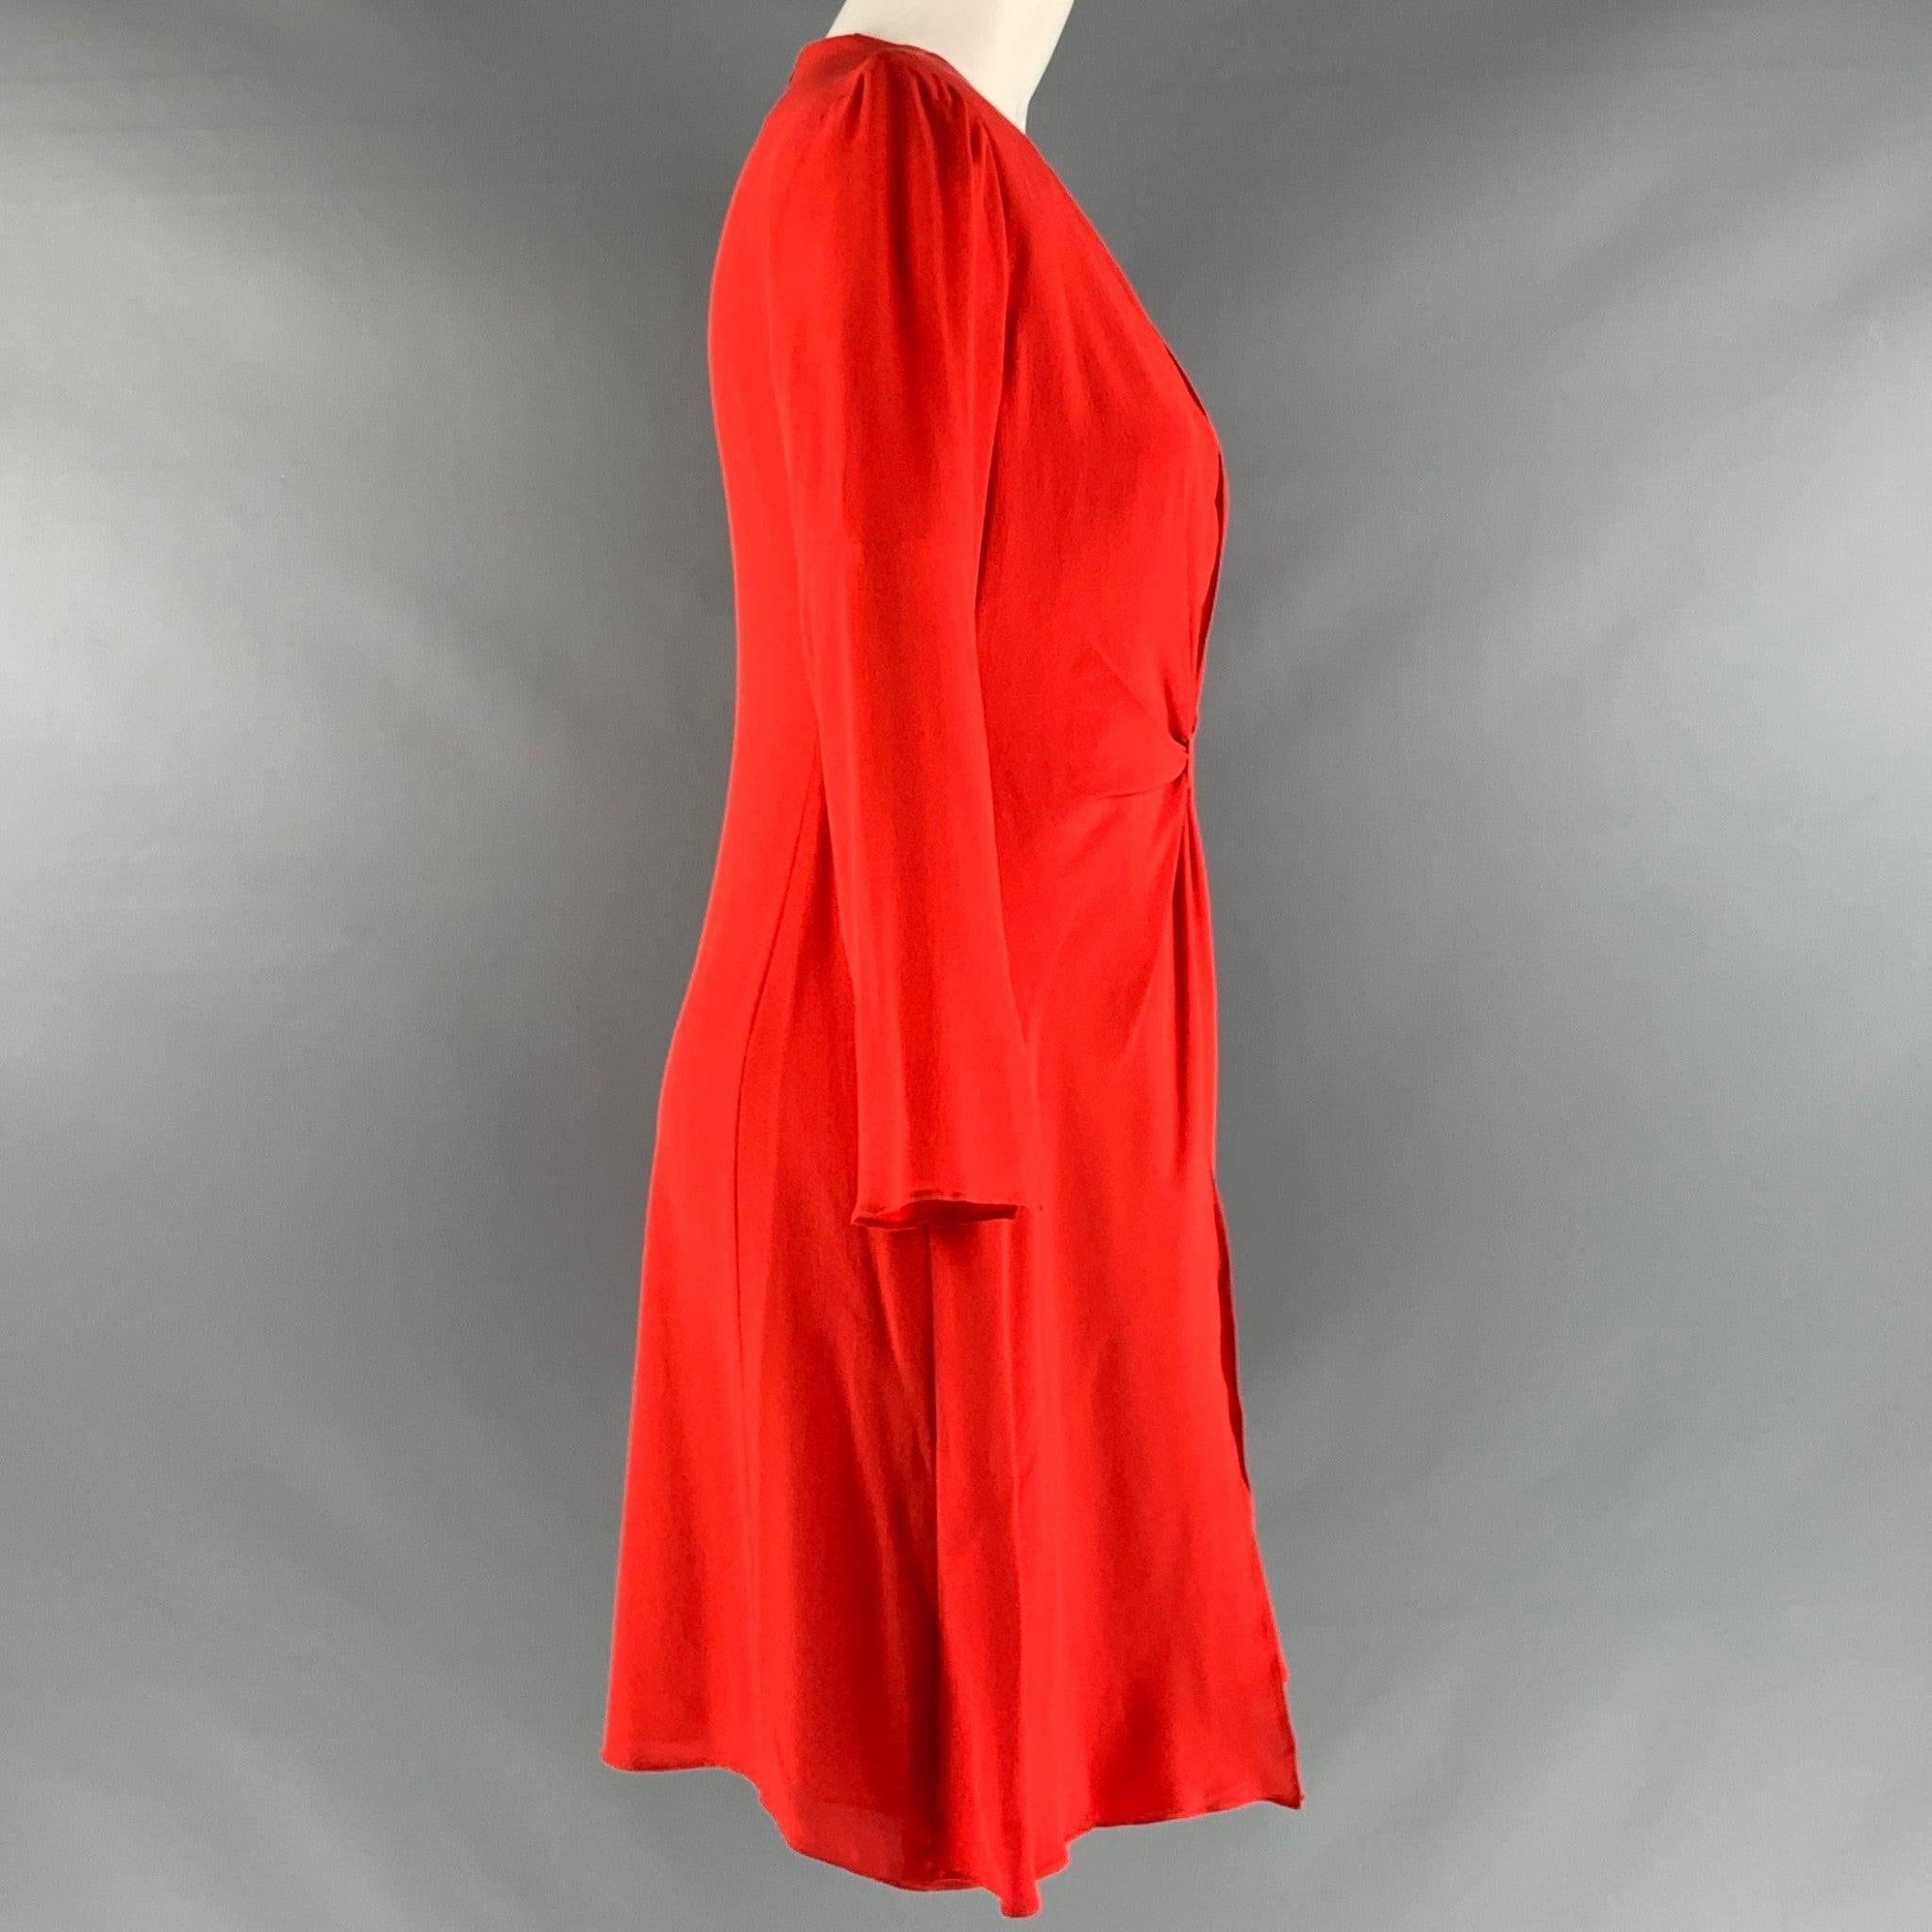 EMPORIO ARMANI
dress in a red silk fabric featuring a faux wrap style, V-neck, knee length, and back zipper closure.Very Good Pre-Owned Condition. Minor signs of wear. 

Marked:  40 

Measurements: 
 
Shoulder: 14.5 inches Sleeve: 20 inches Bust: 35